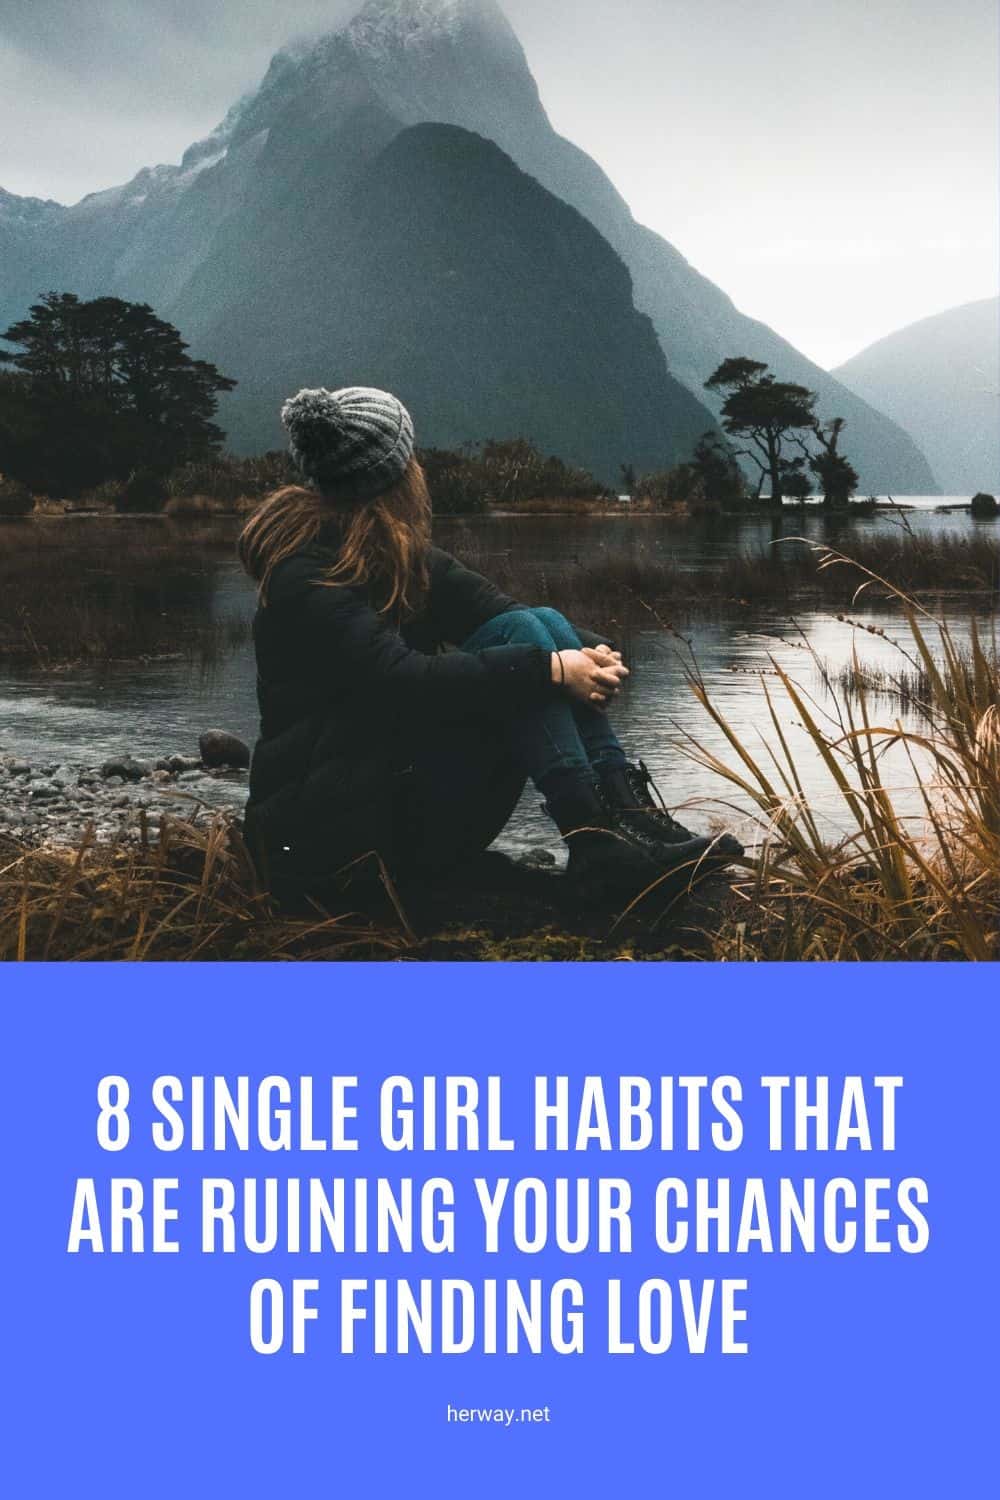 8 Single Girl Habits That Are Ruining Your Chances Of Finding Love